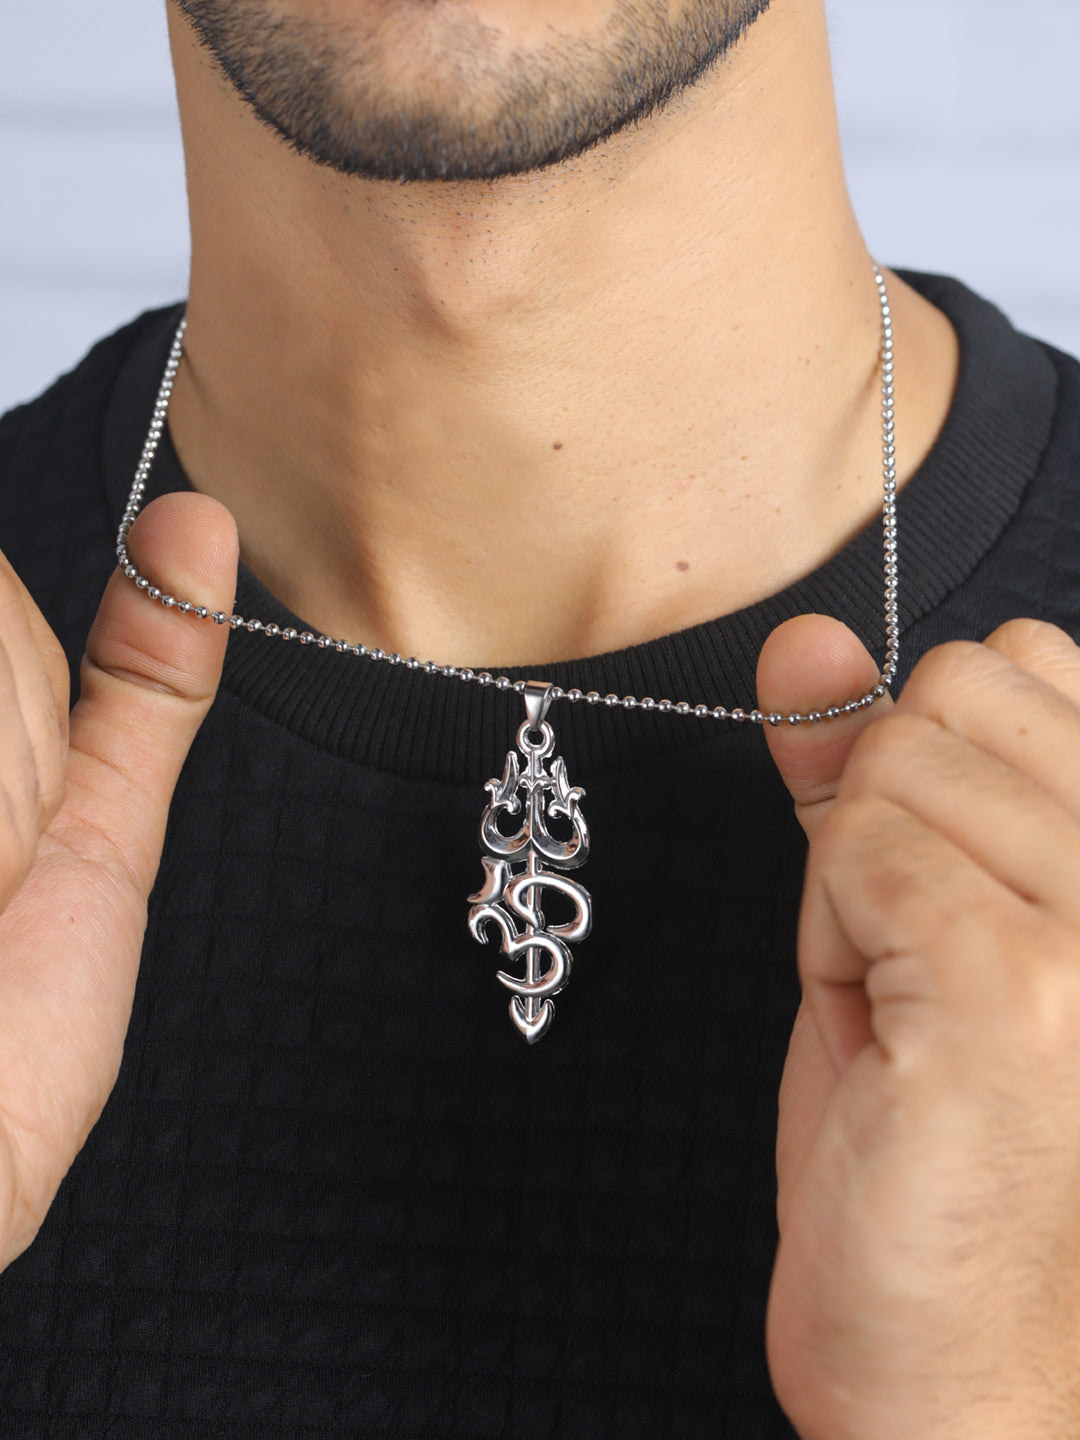 Bold by Priyaasi OM Trishul Silver-Plated Necklace for Men